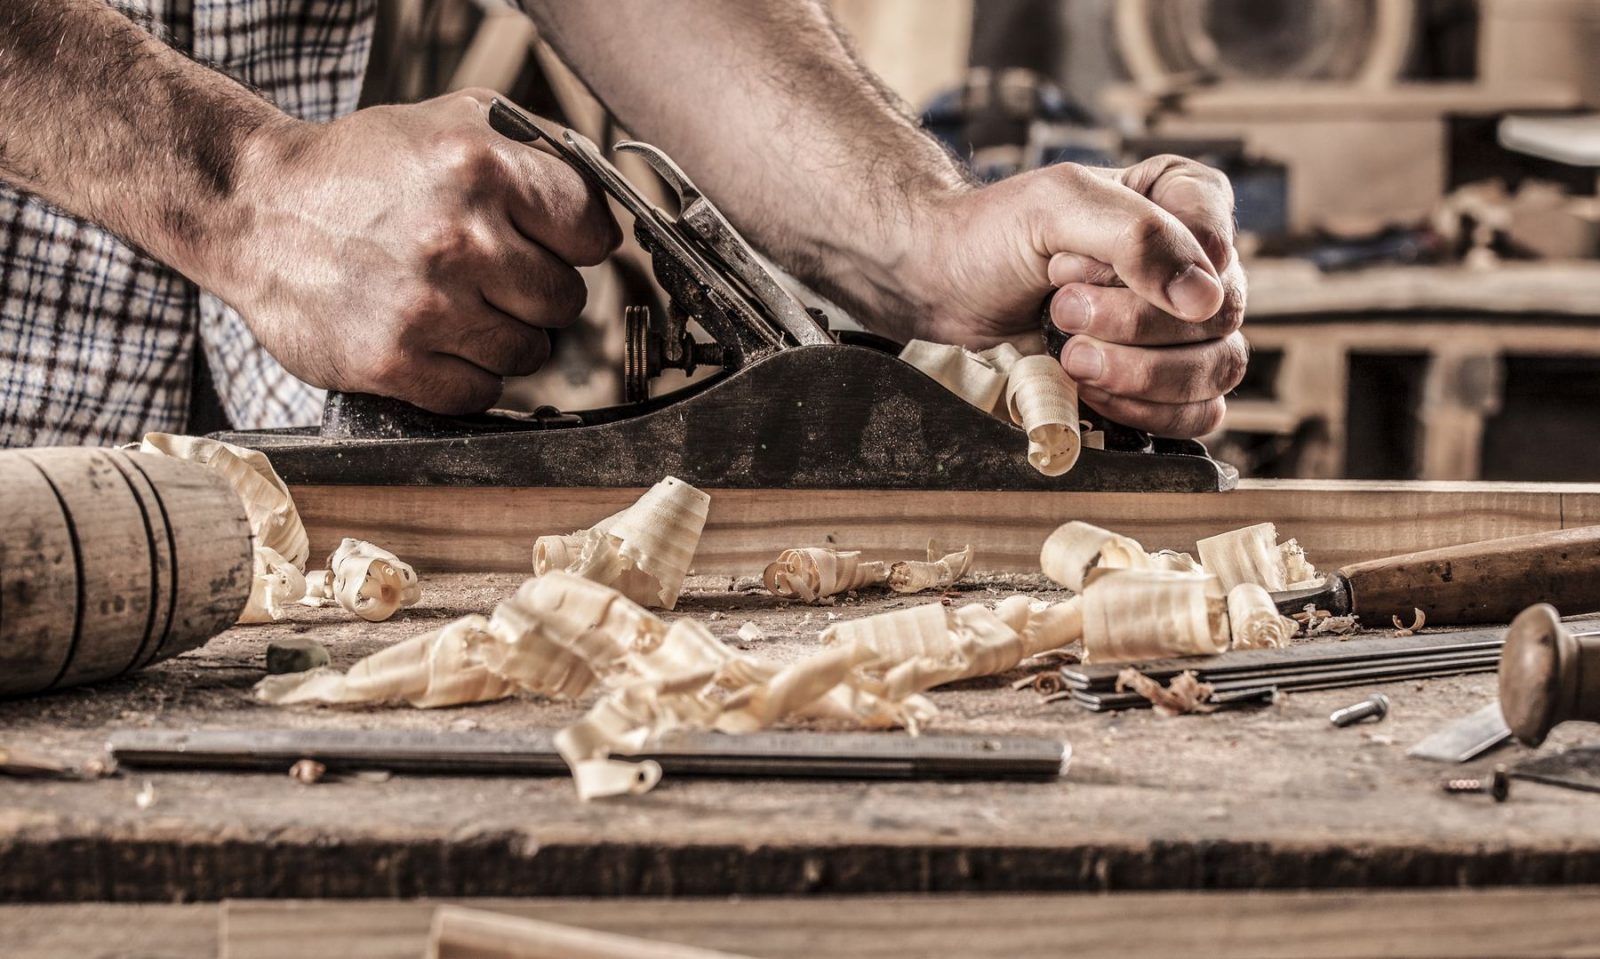 Two hands pushing a plane on wood with wood shavings and carpenter tools on workbench